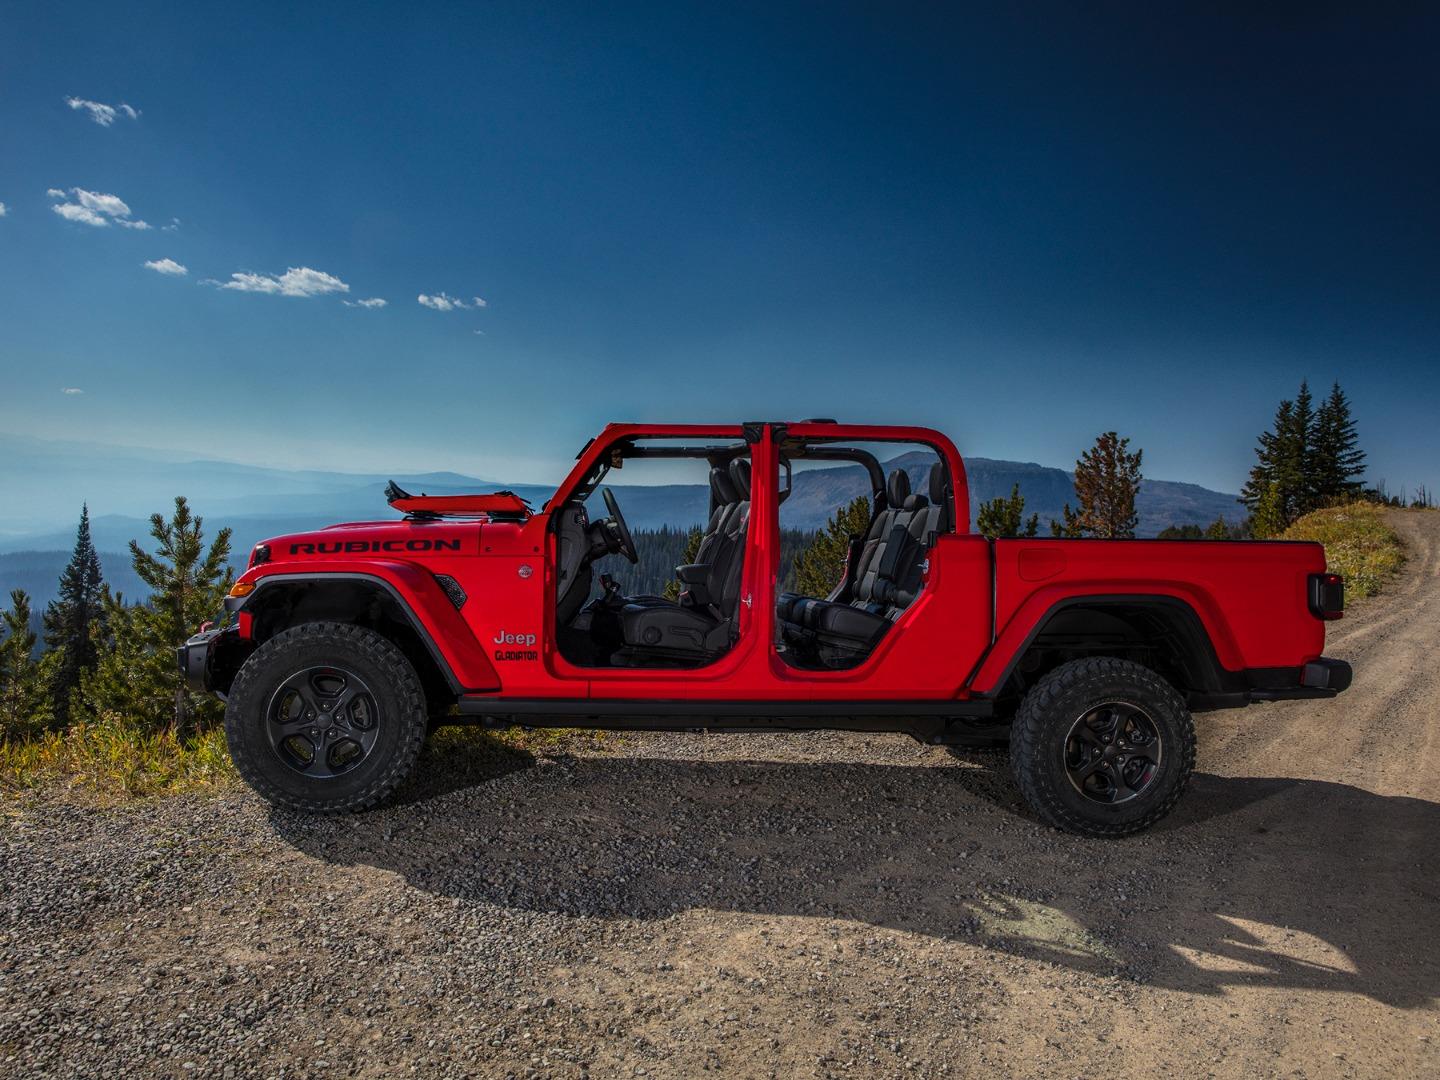 how many seats are there in the jeep gladiator?